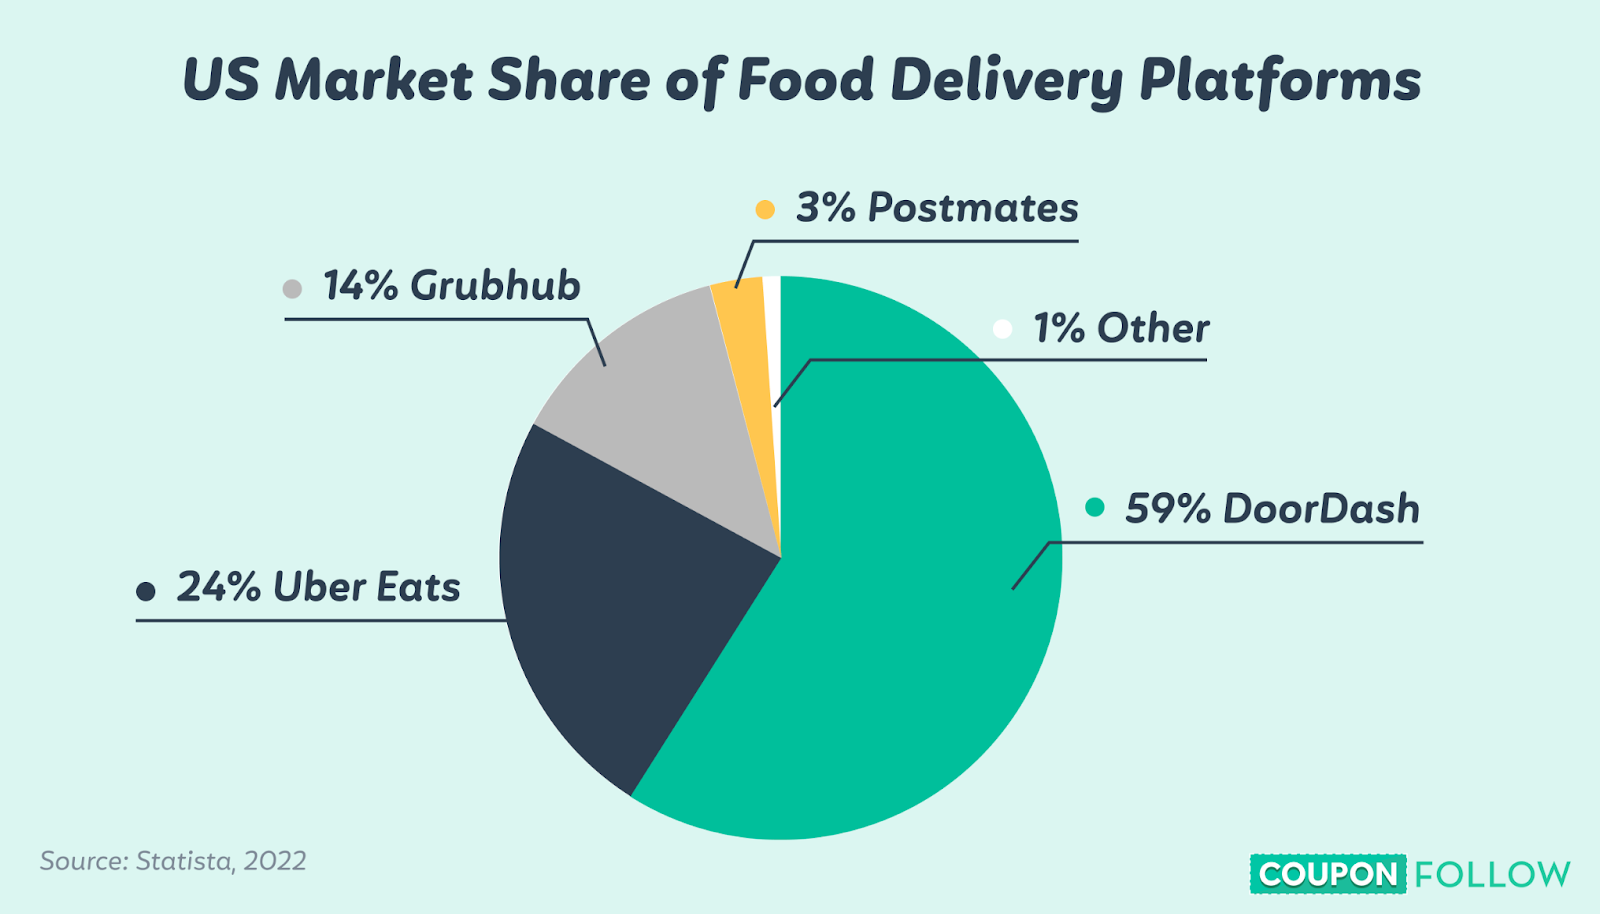 Pie chart showing market share of food delivery platforms